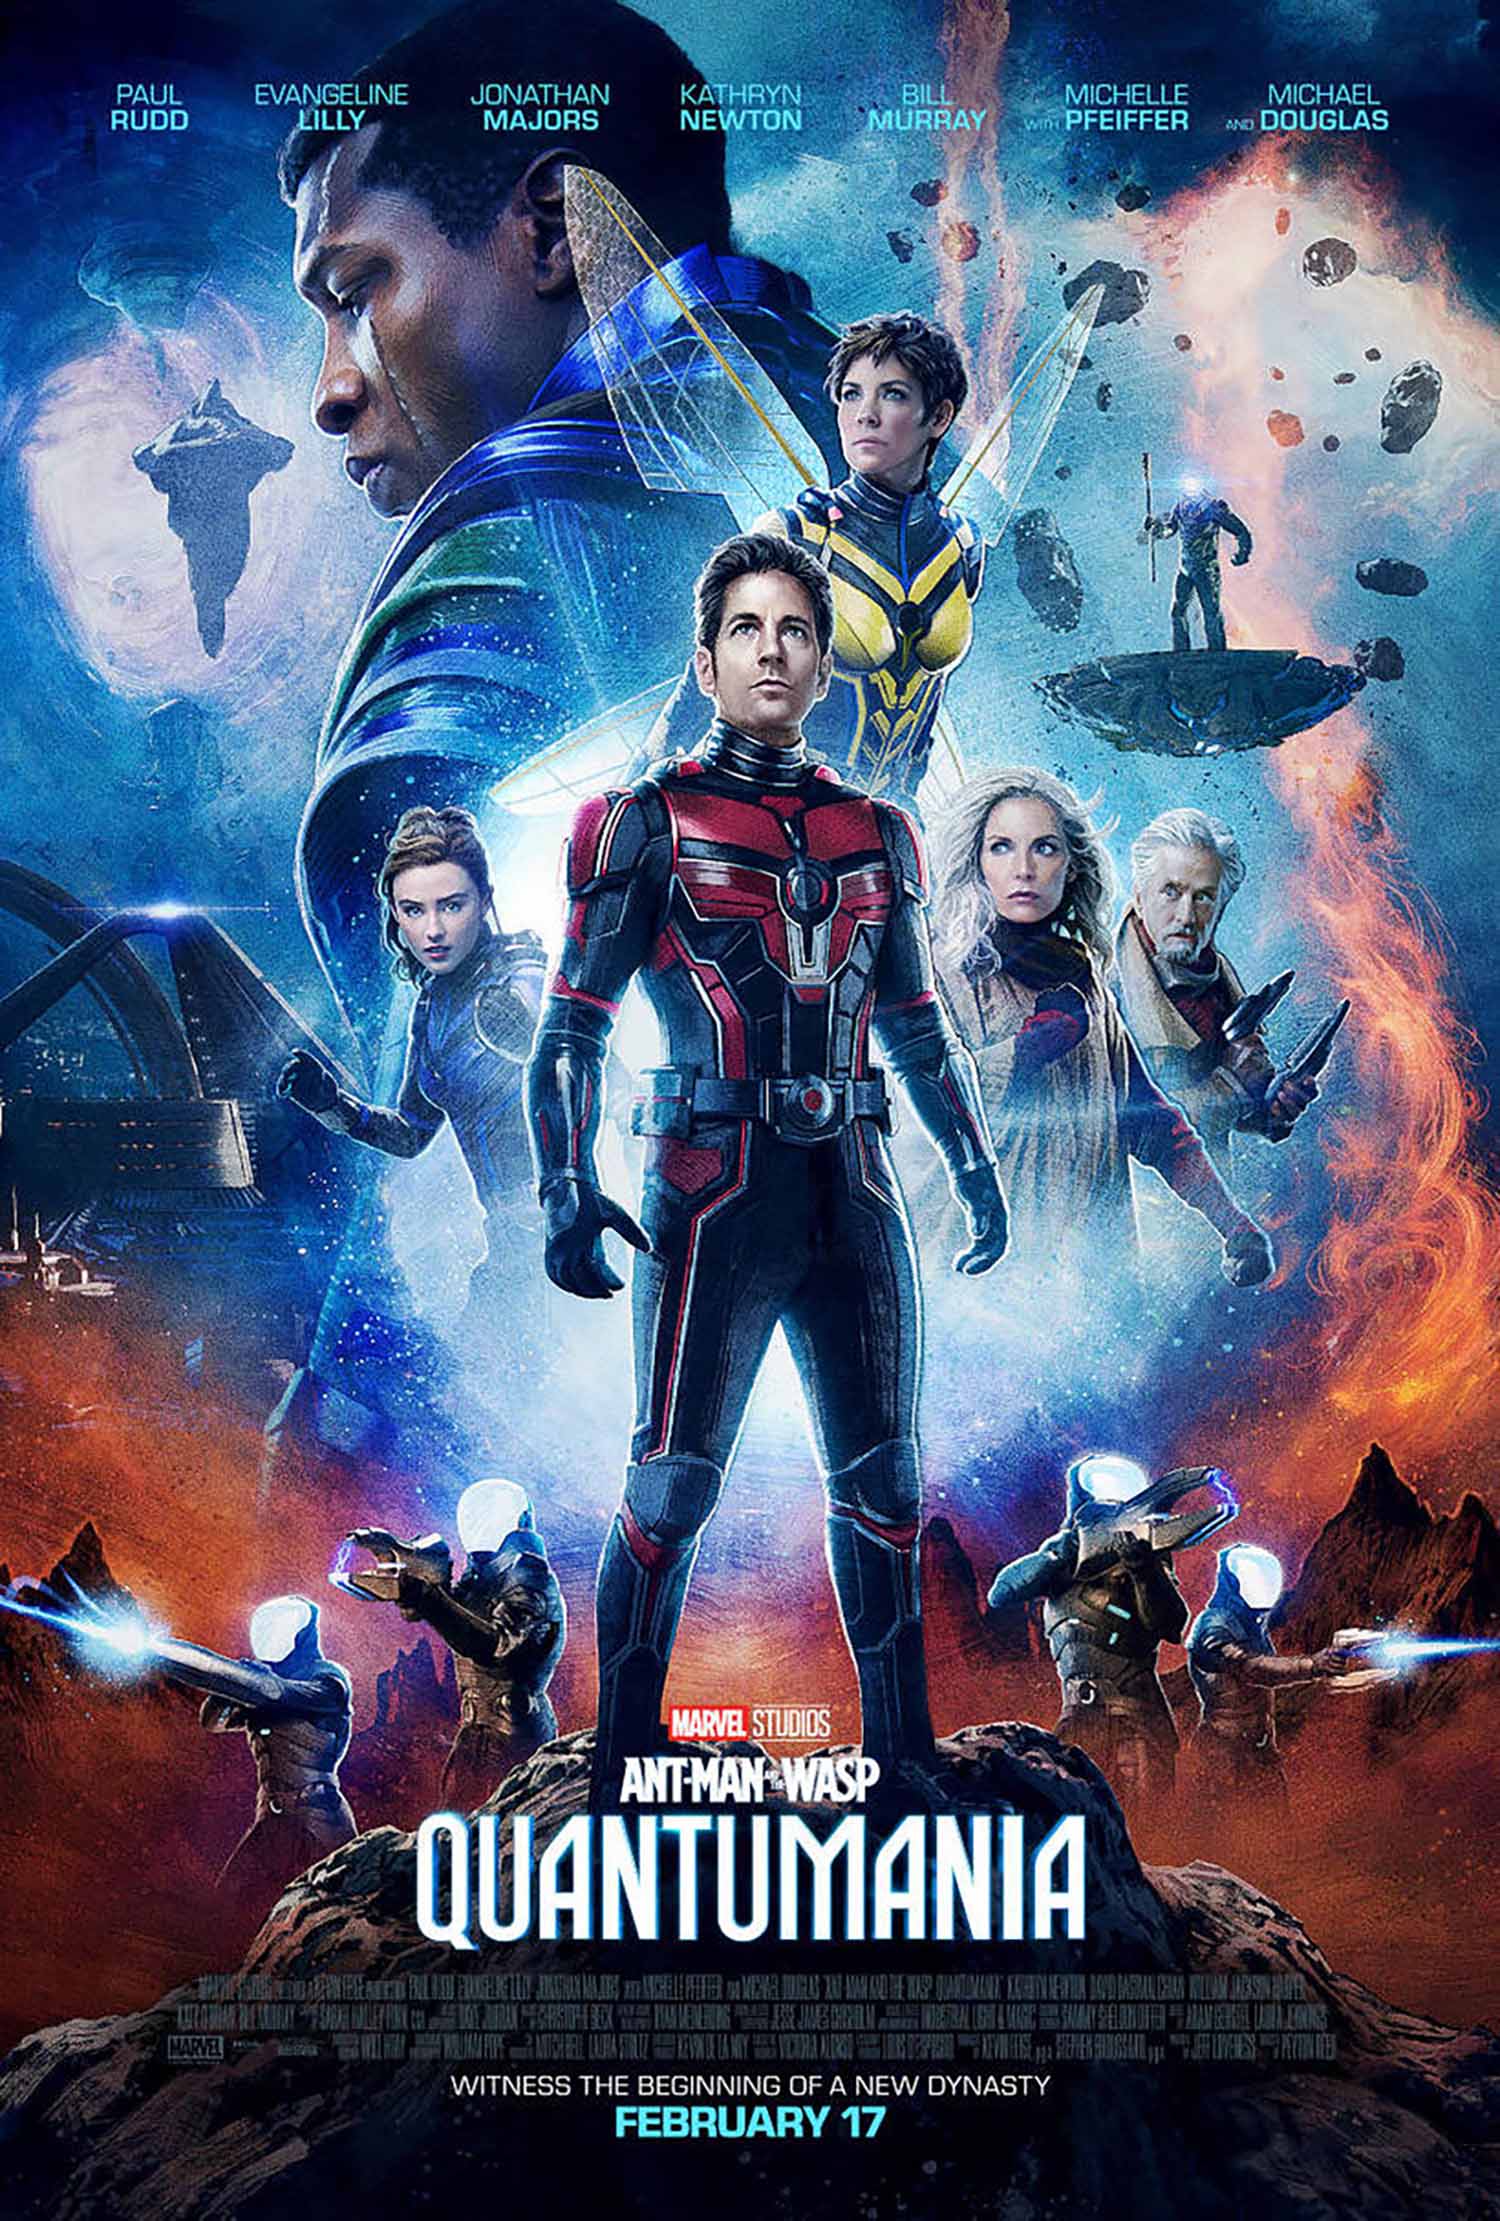 Photo: Colorful movie poster for Ant-Man and Wasp: Quantumania. Features Ant-Man in the center and those in the movie all around in colorful blues, reds, pinks, and purples.